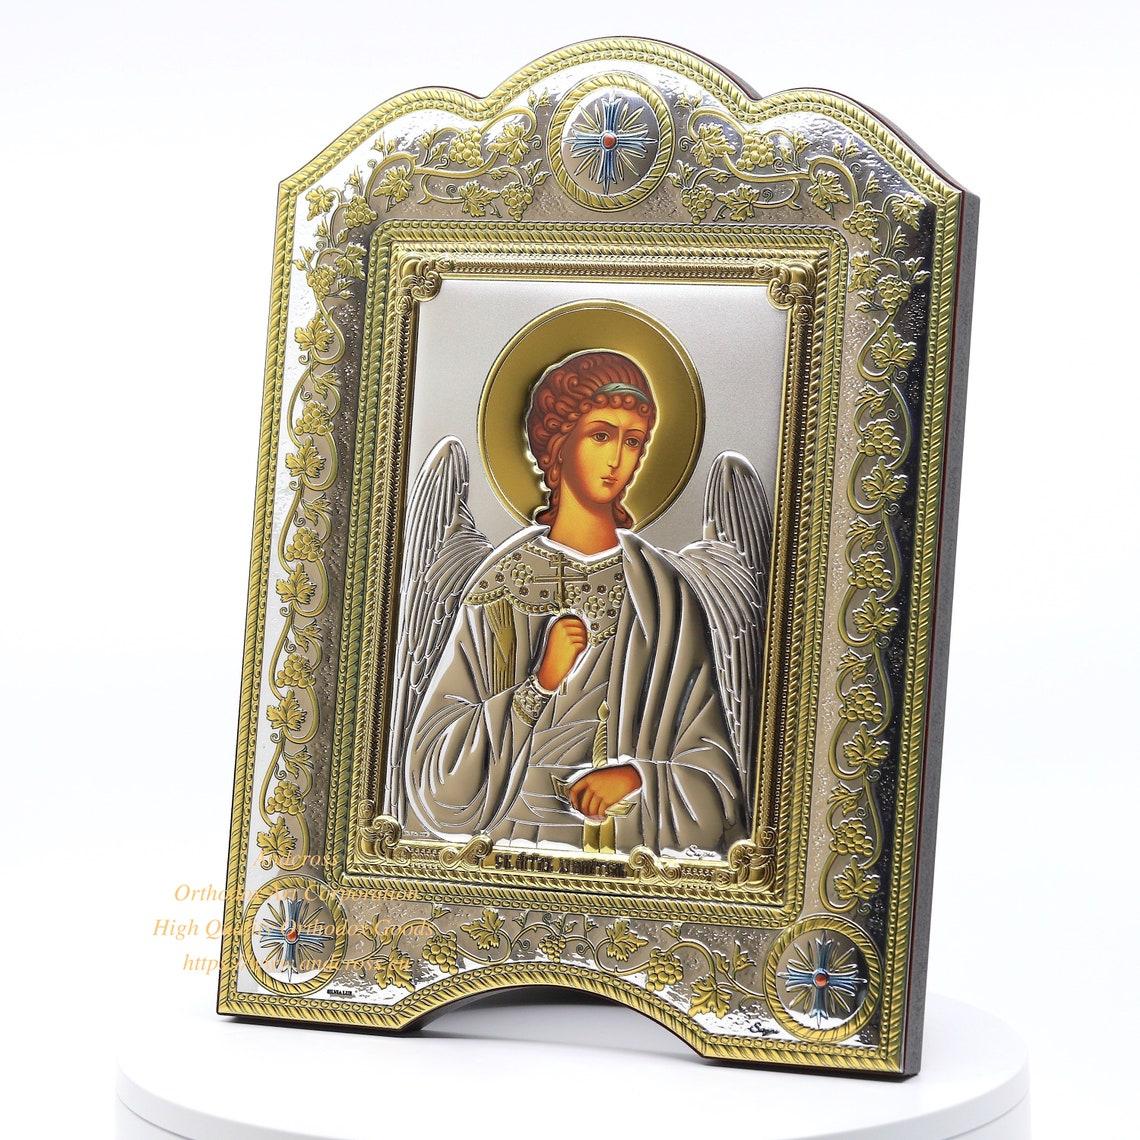 The Great Miraculous Christian Orthodox Silver Icon – The Guardian Angel. 21cmx28cm Gold and silver version. B103|The Great Miraculous Christian Orthodox Silver Icon – The Guardian Angel. 21cmx28cm Gold and silver version. B103|The Great Miraculous Christian Orthodox Silver Icon – The Guardian Angel. 21cmx28cm Gold and silver version. B103|The Great Miraculous Christian Orthodox Silver Icon – The Guardian Angel. 21cmx28cm Gold and silver version. B103|The Great Miraculous Christian Orthodox Silver Icon – The Guardian Angel. 21cmx28cm Gold and silver version. B103|The Great Miraculous Christian Orthodox Silver Icon – The Guardian Angel. 21cmx28cm Gold and silver version. B103